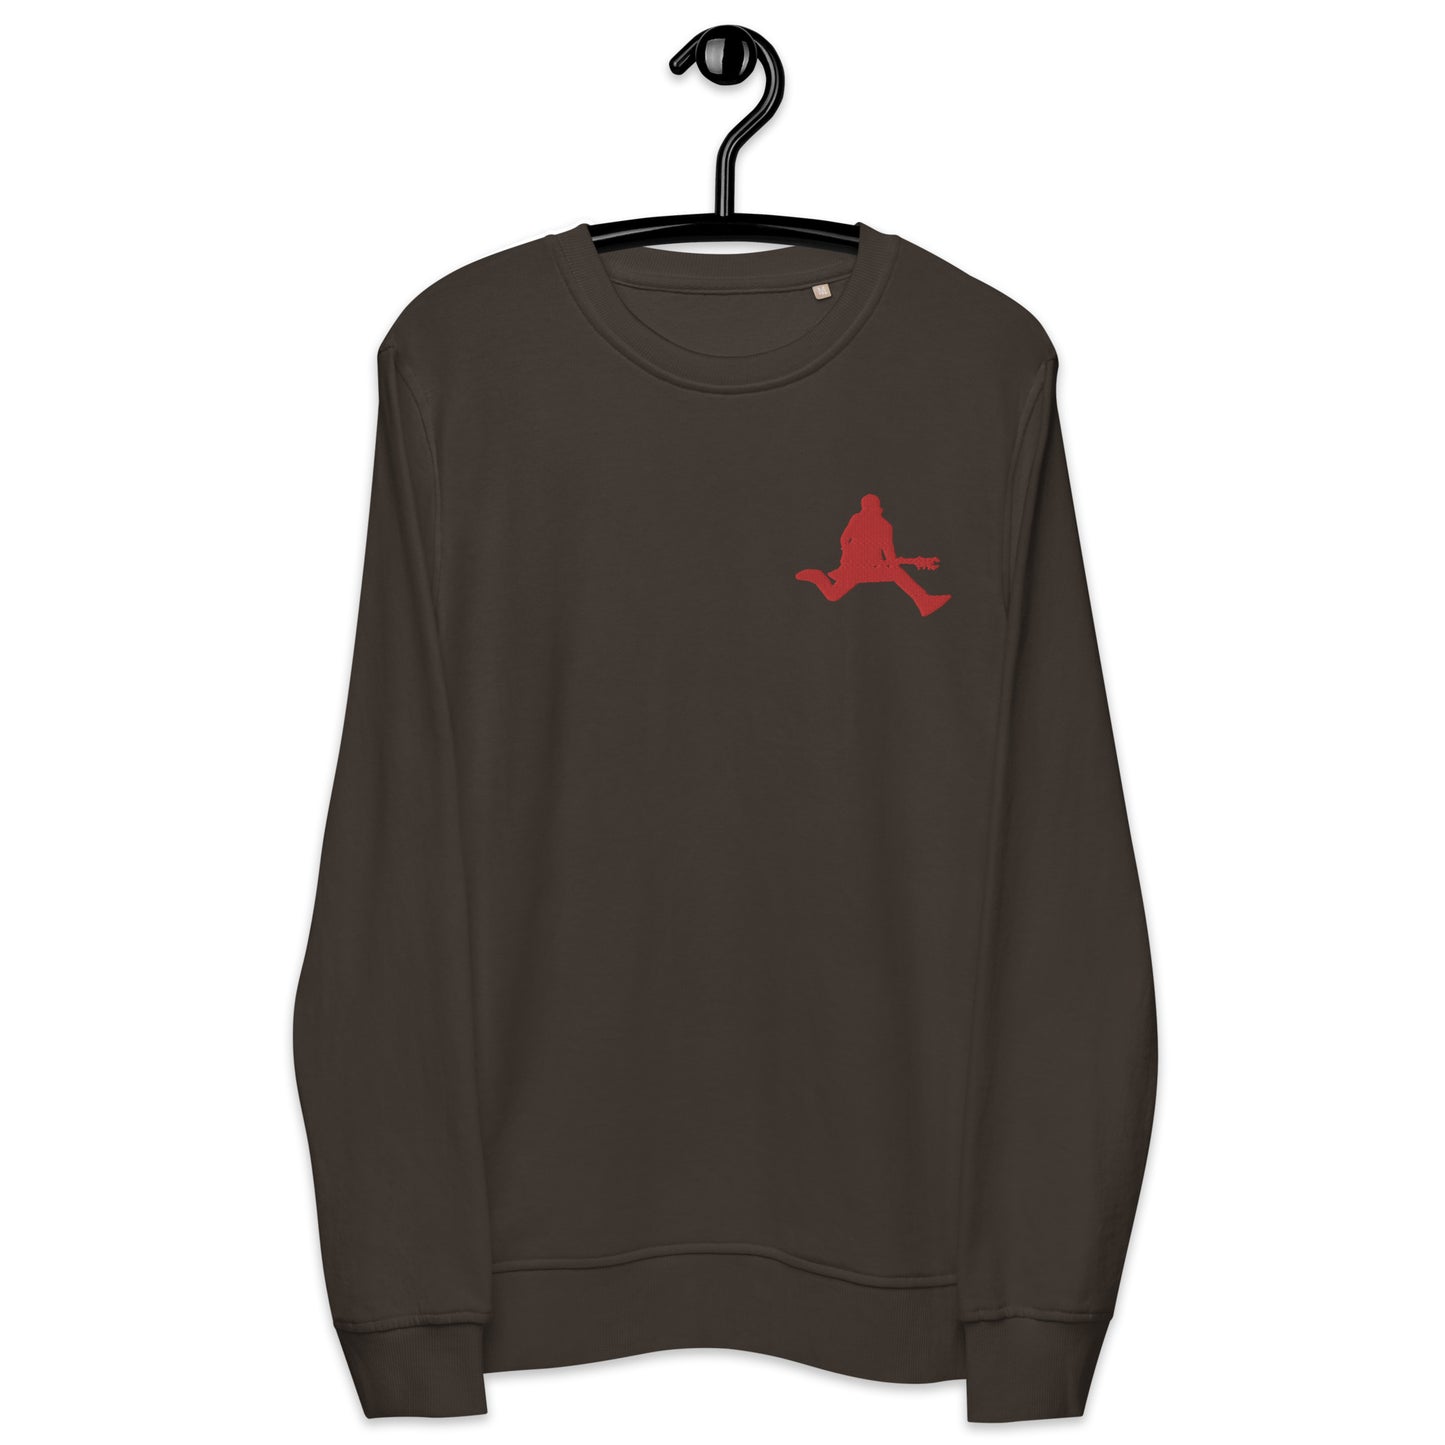 Very Simple Rock star Long Sleeve Modeluvin Simple design of a Rock n Rolline Guitar kick - Black and Red Revelations Season 1 MDLVN END OF YEAR